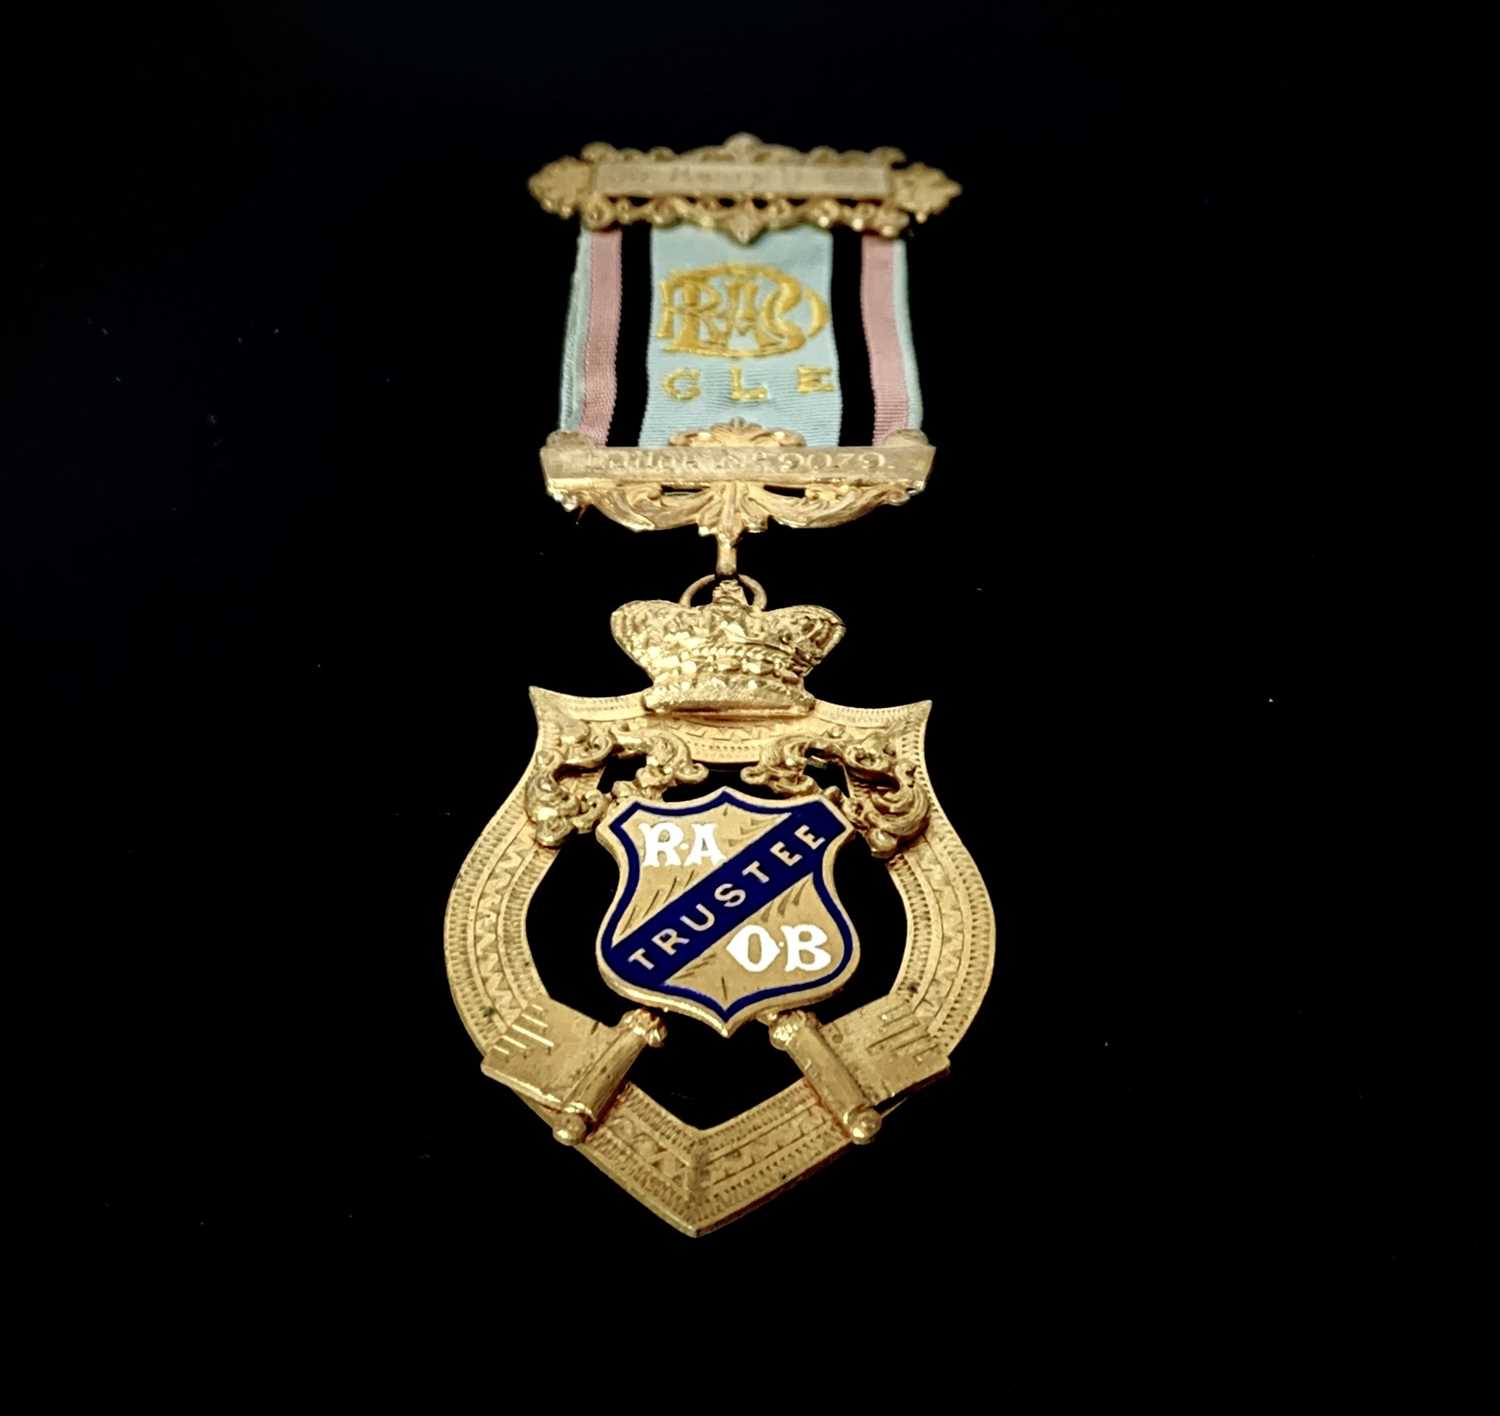 RAOB Medals - group of 5 to G.Ware 1960's - 1990's, 4 silver Sir Henry Irvine Lodge. - Image 15 of 16